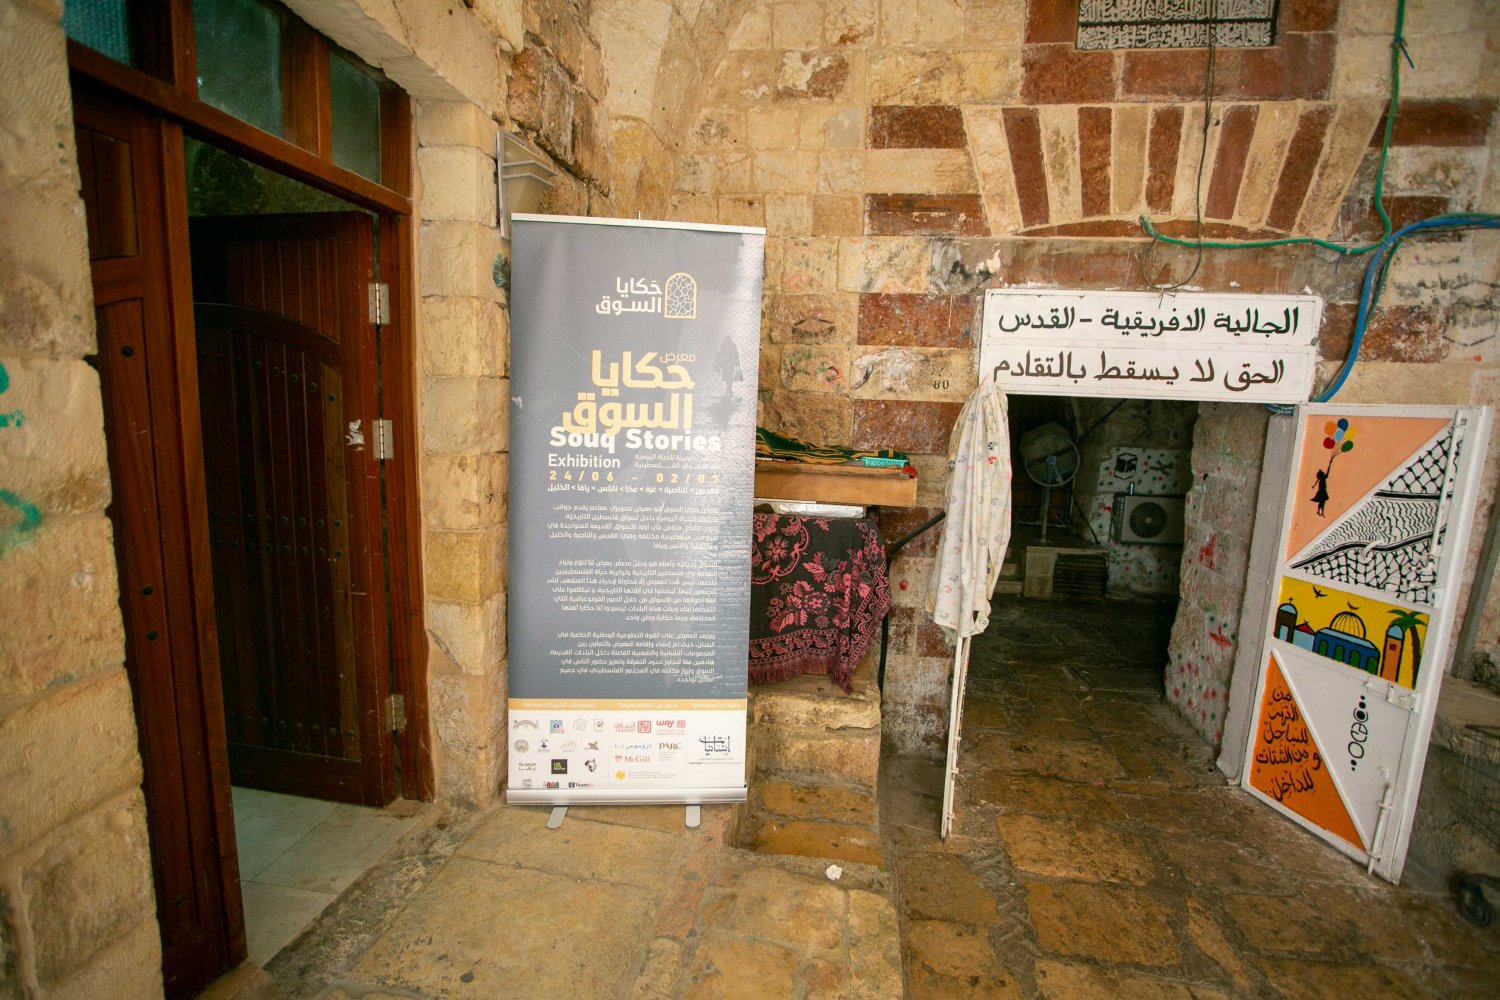 "Souq Stories" banner outside a Middle Eastern market photo exhibit in Jerusalem's Old City